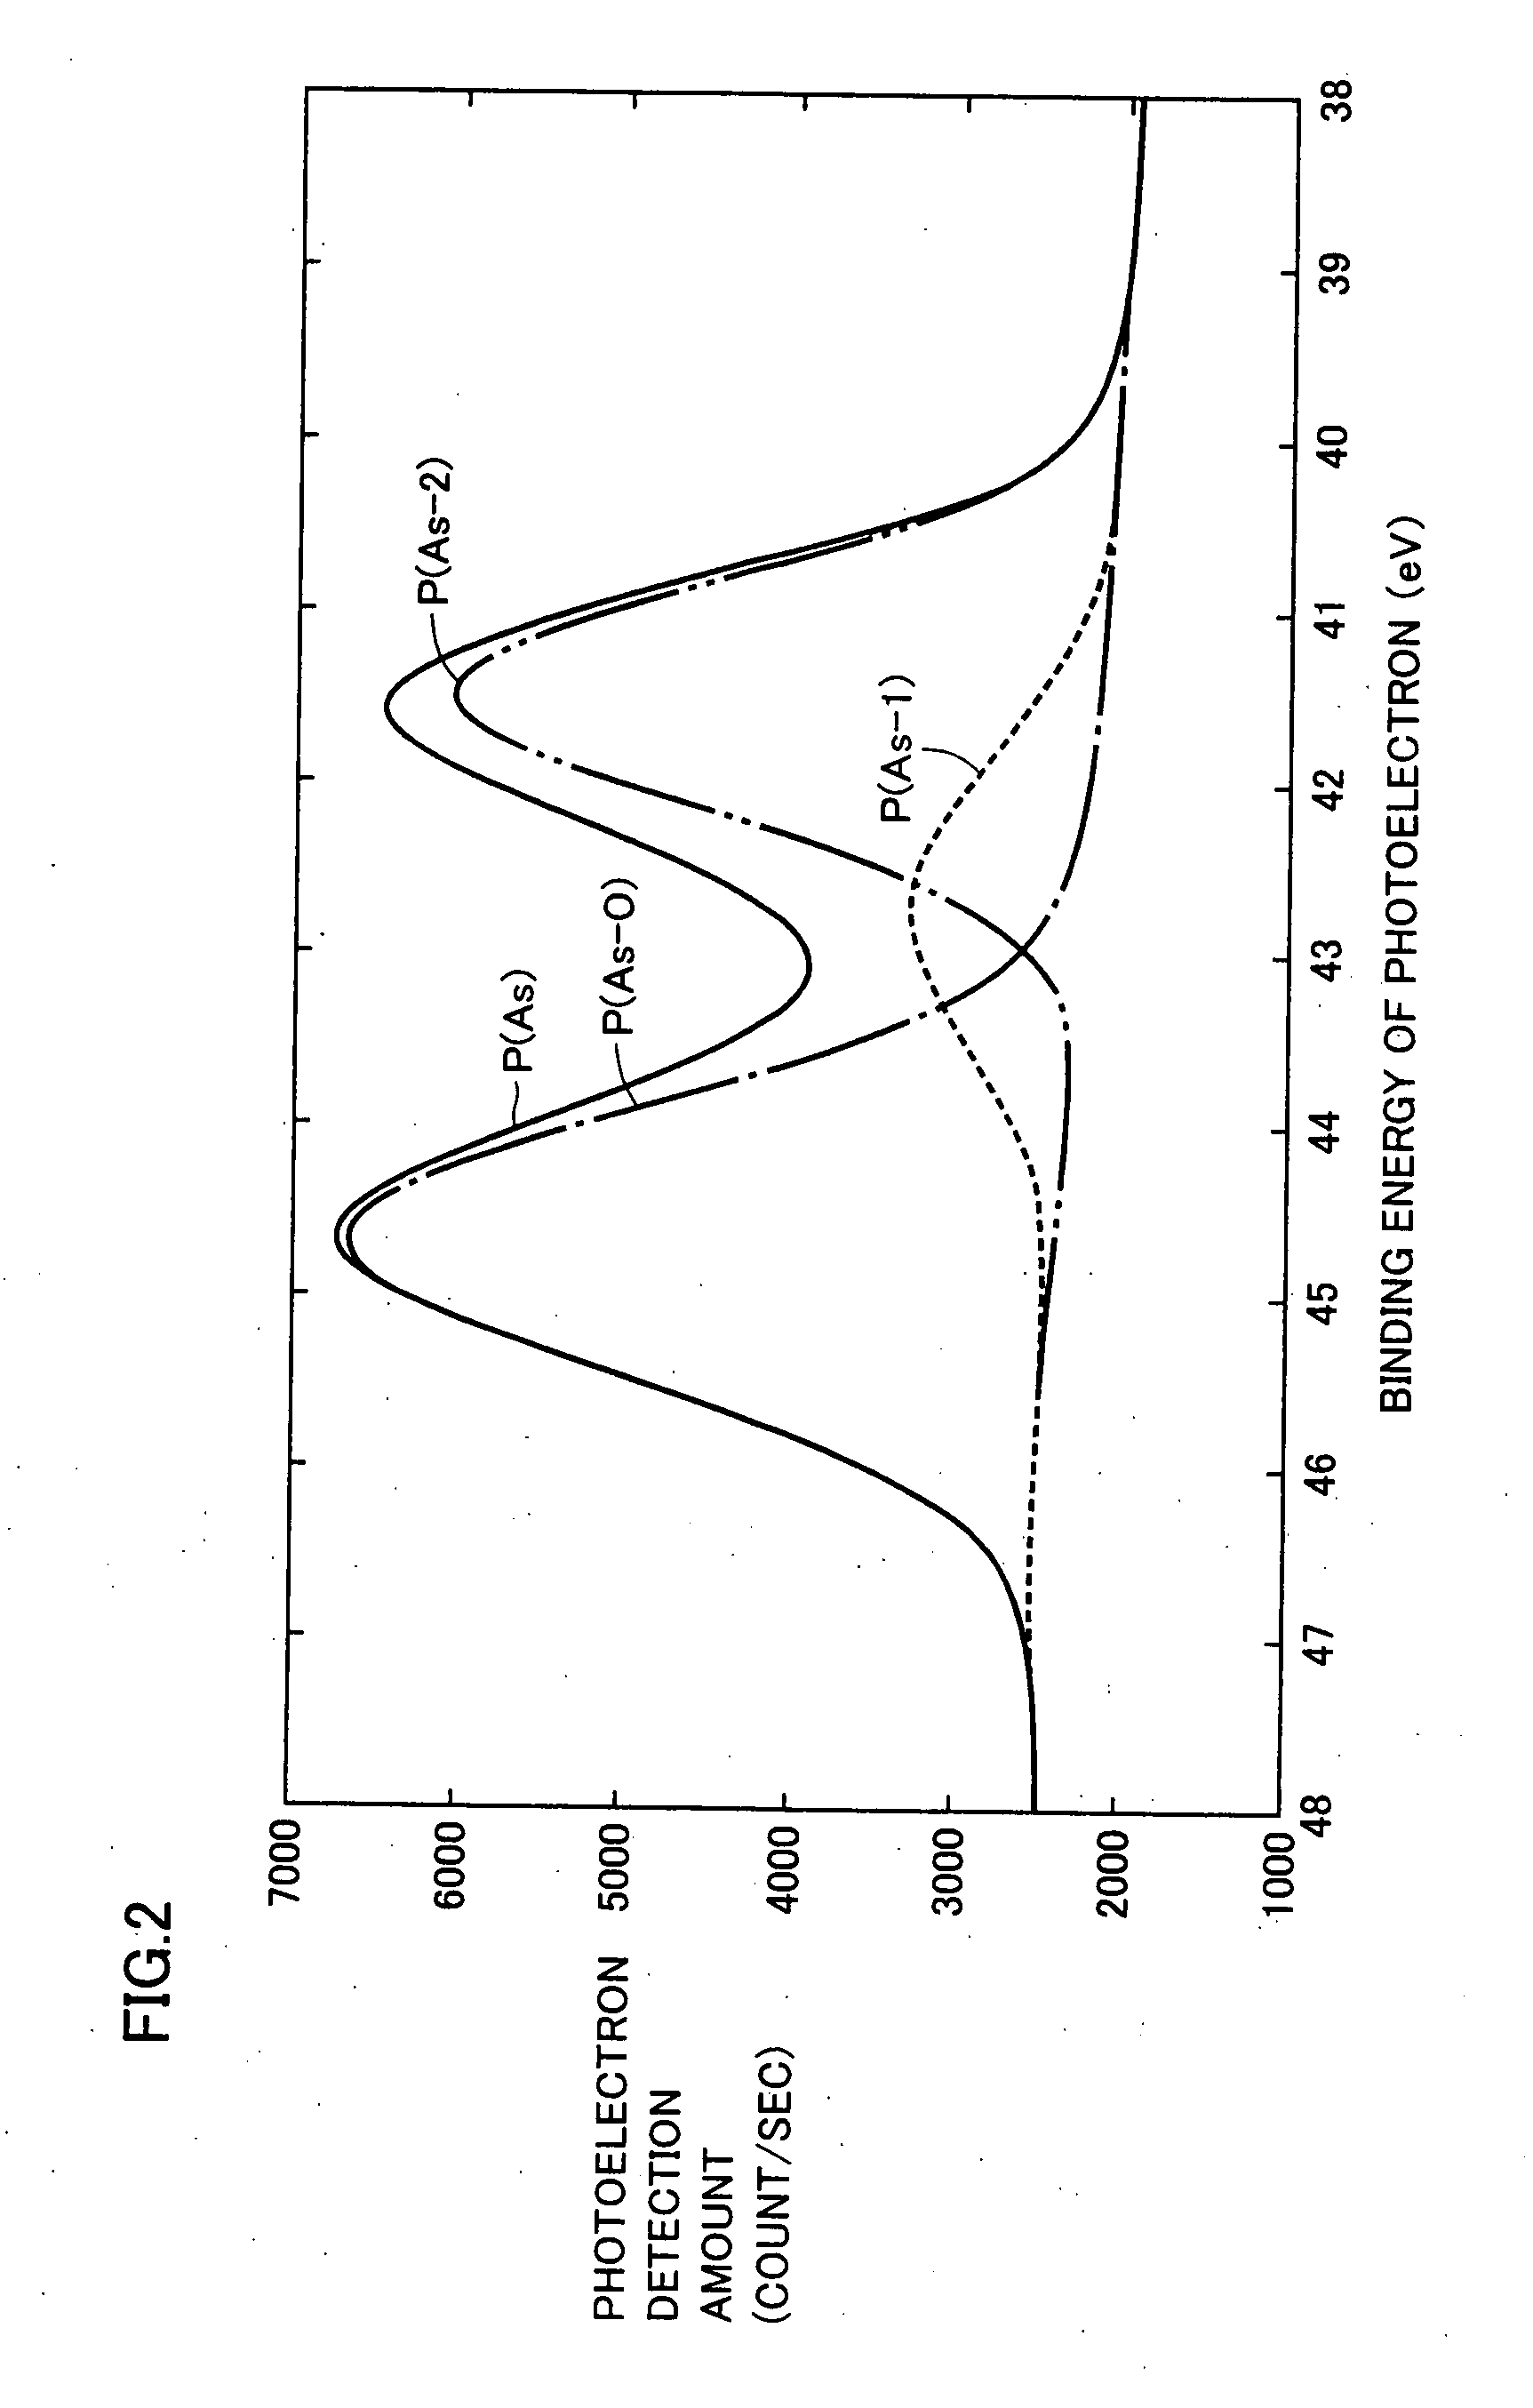 GaAs semiconductor substrate and fabrication method thereof